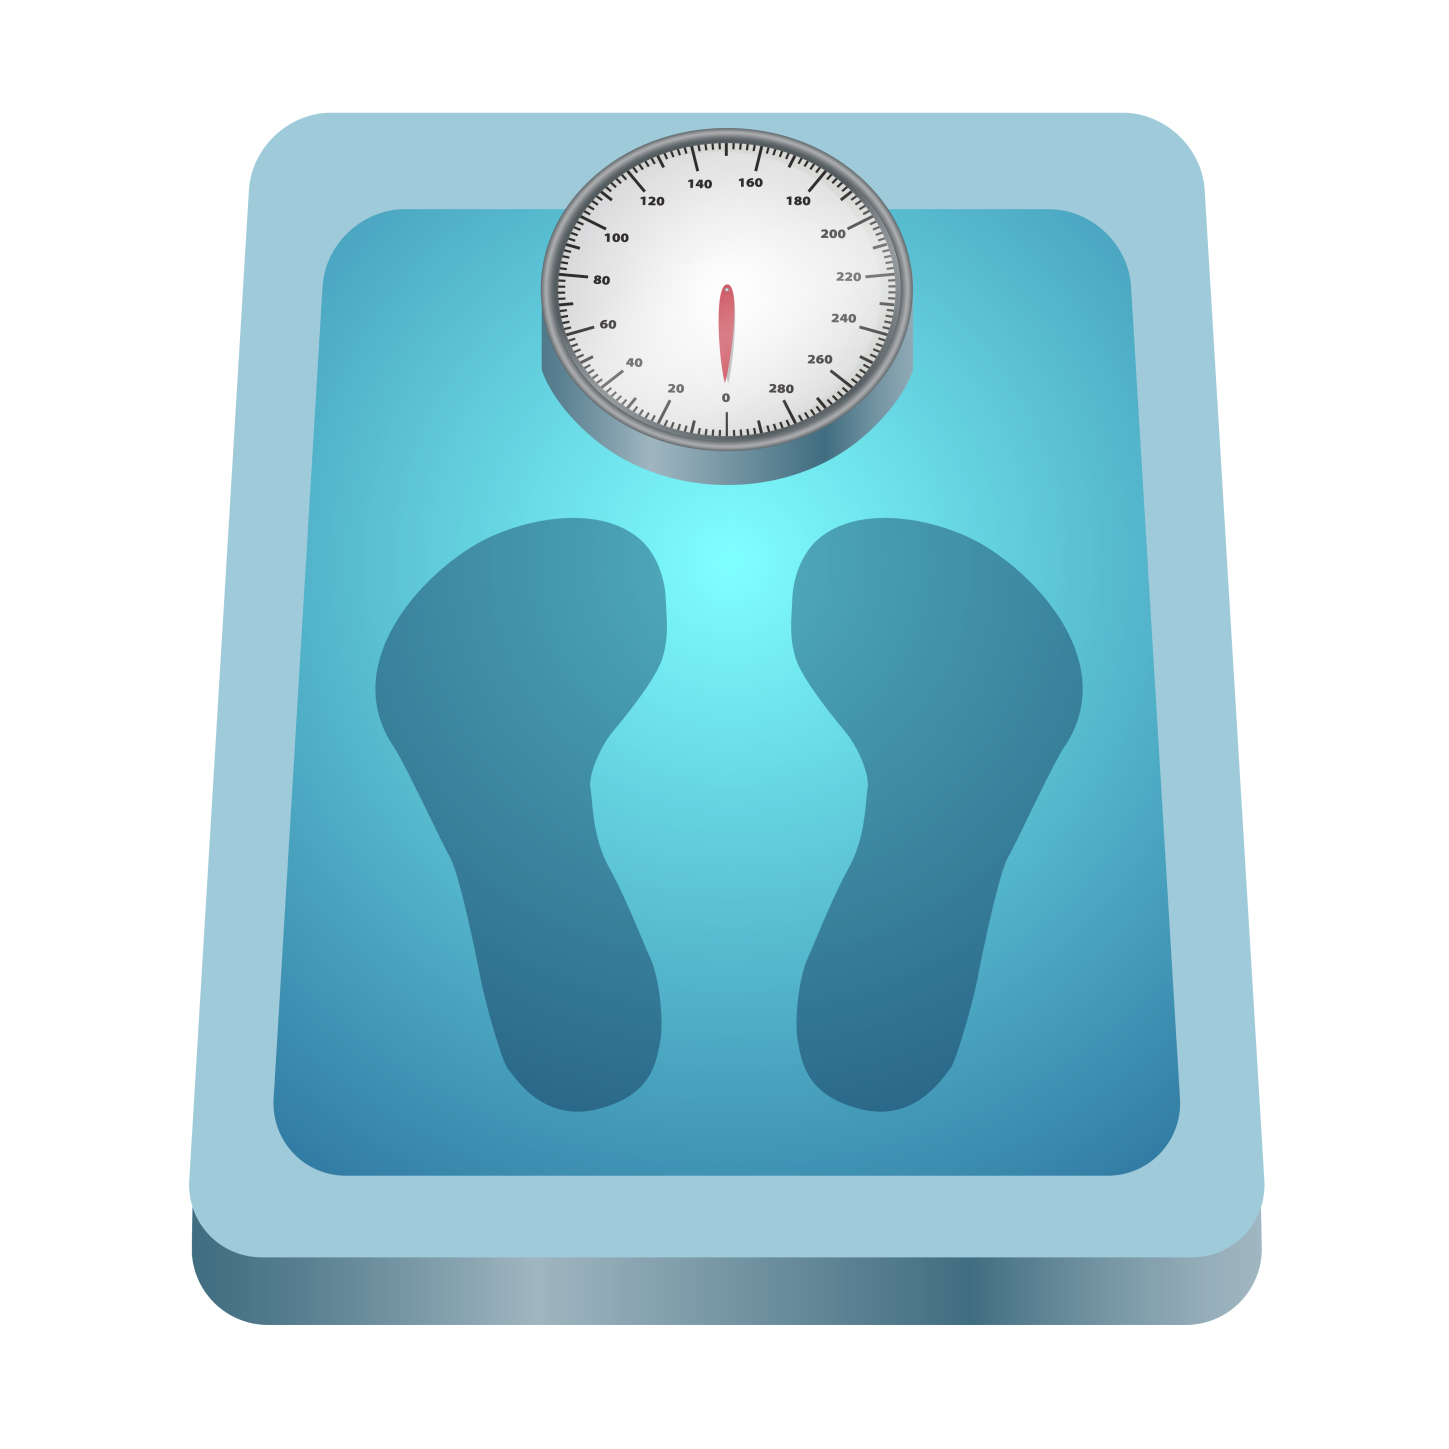 Weighing machine clipart 20 free Cliparts | Download images on